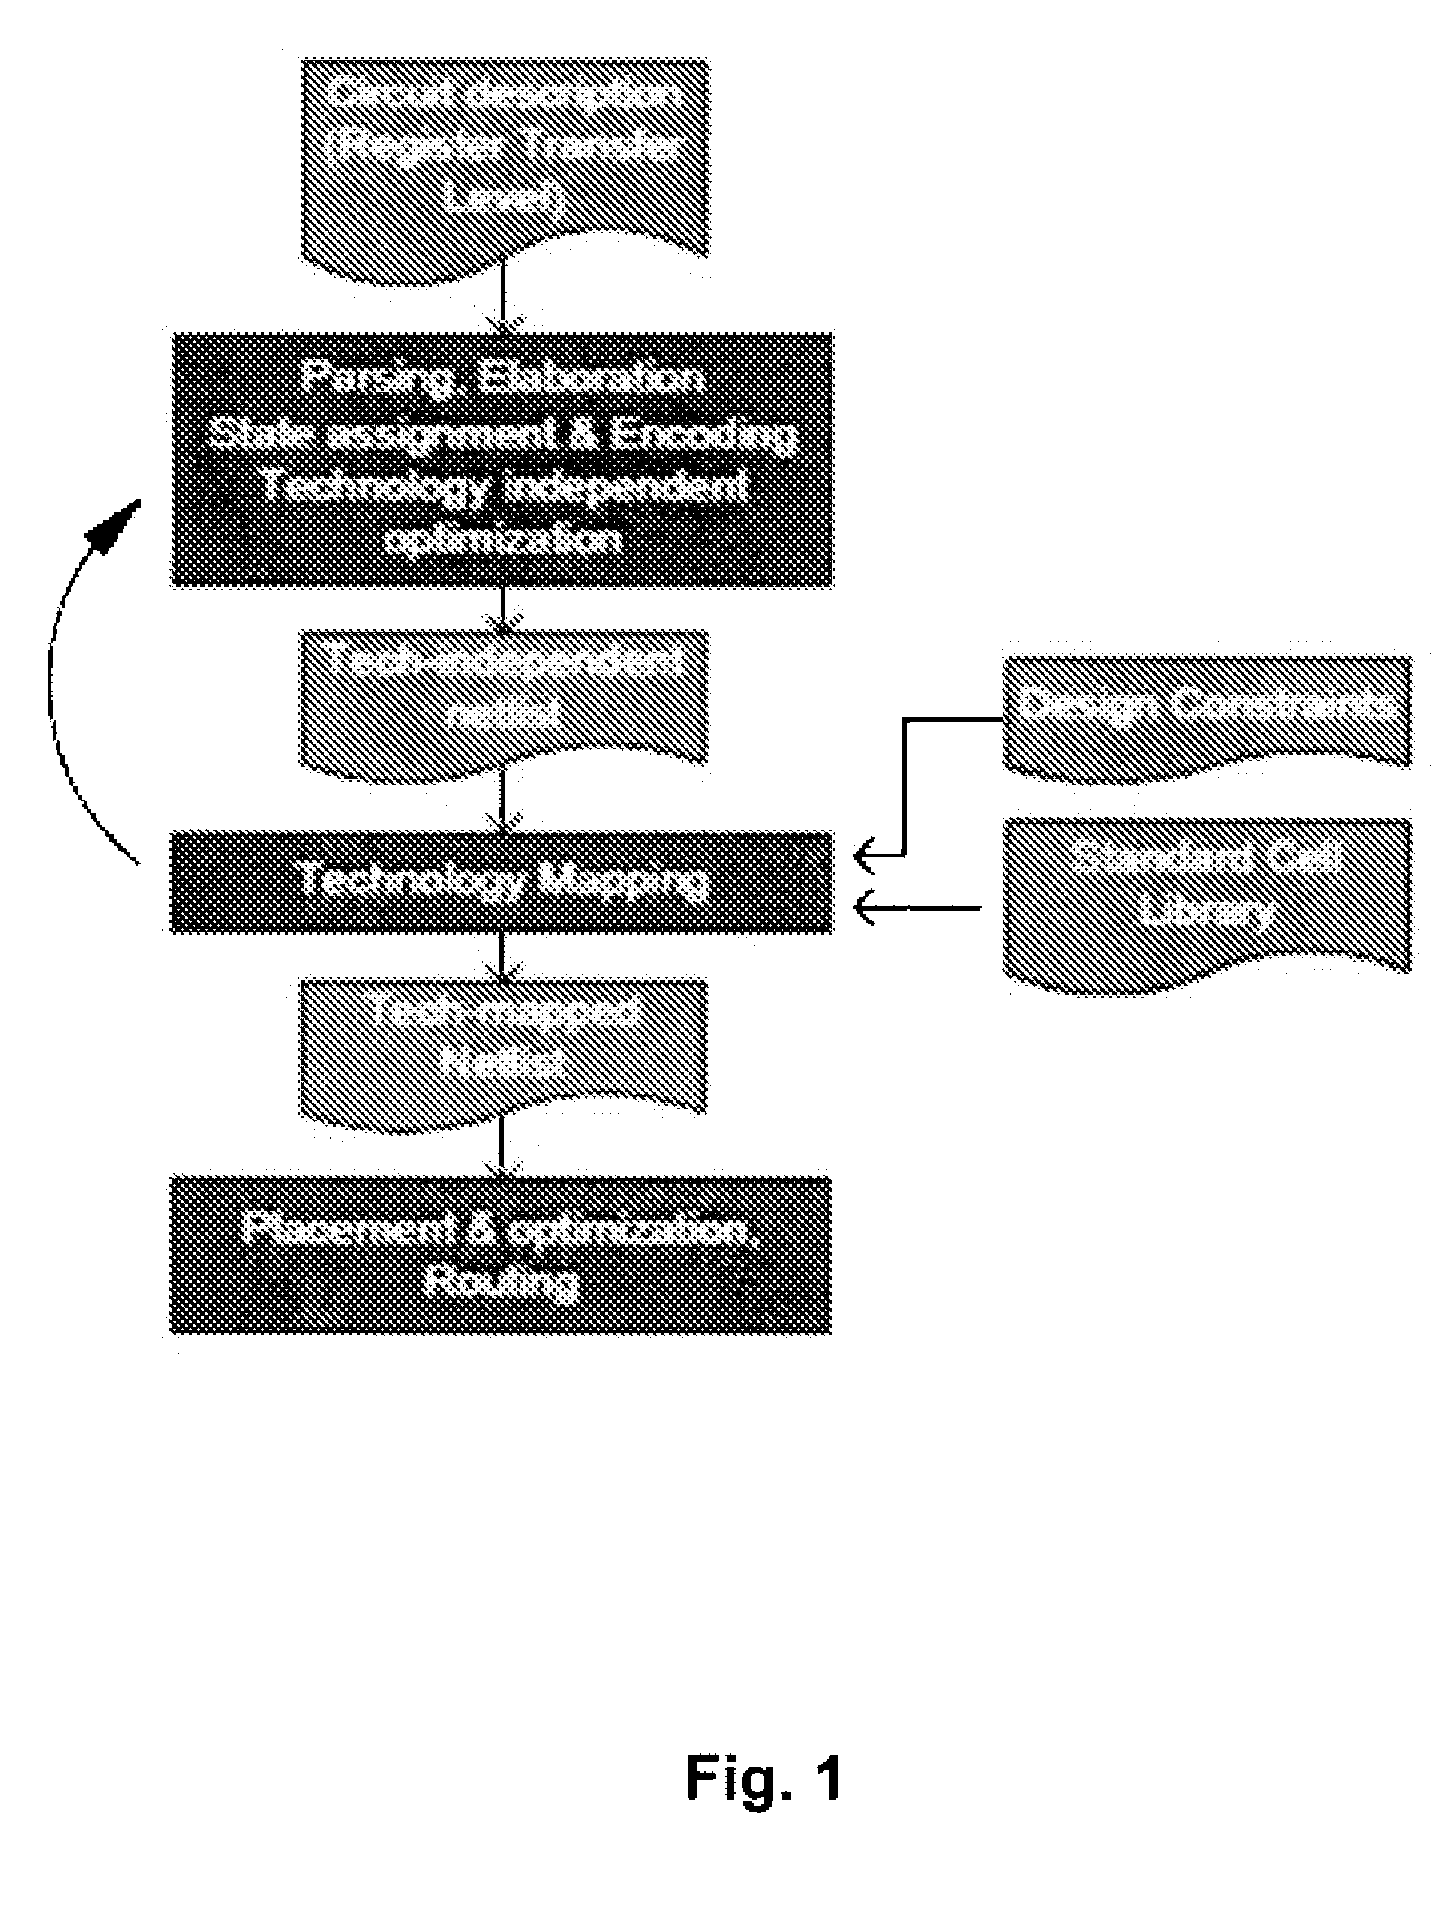 Method And System For Mapping A Boolean Logic Network To A Limited Set Of Application-Domain Specific Logic Cells